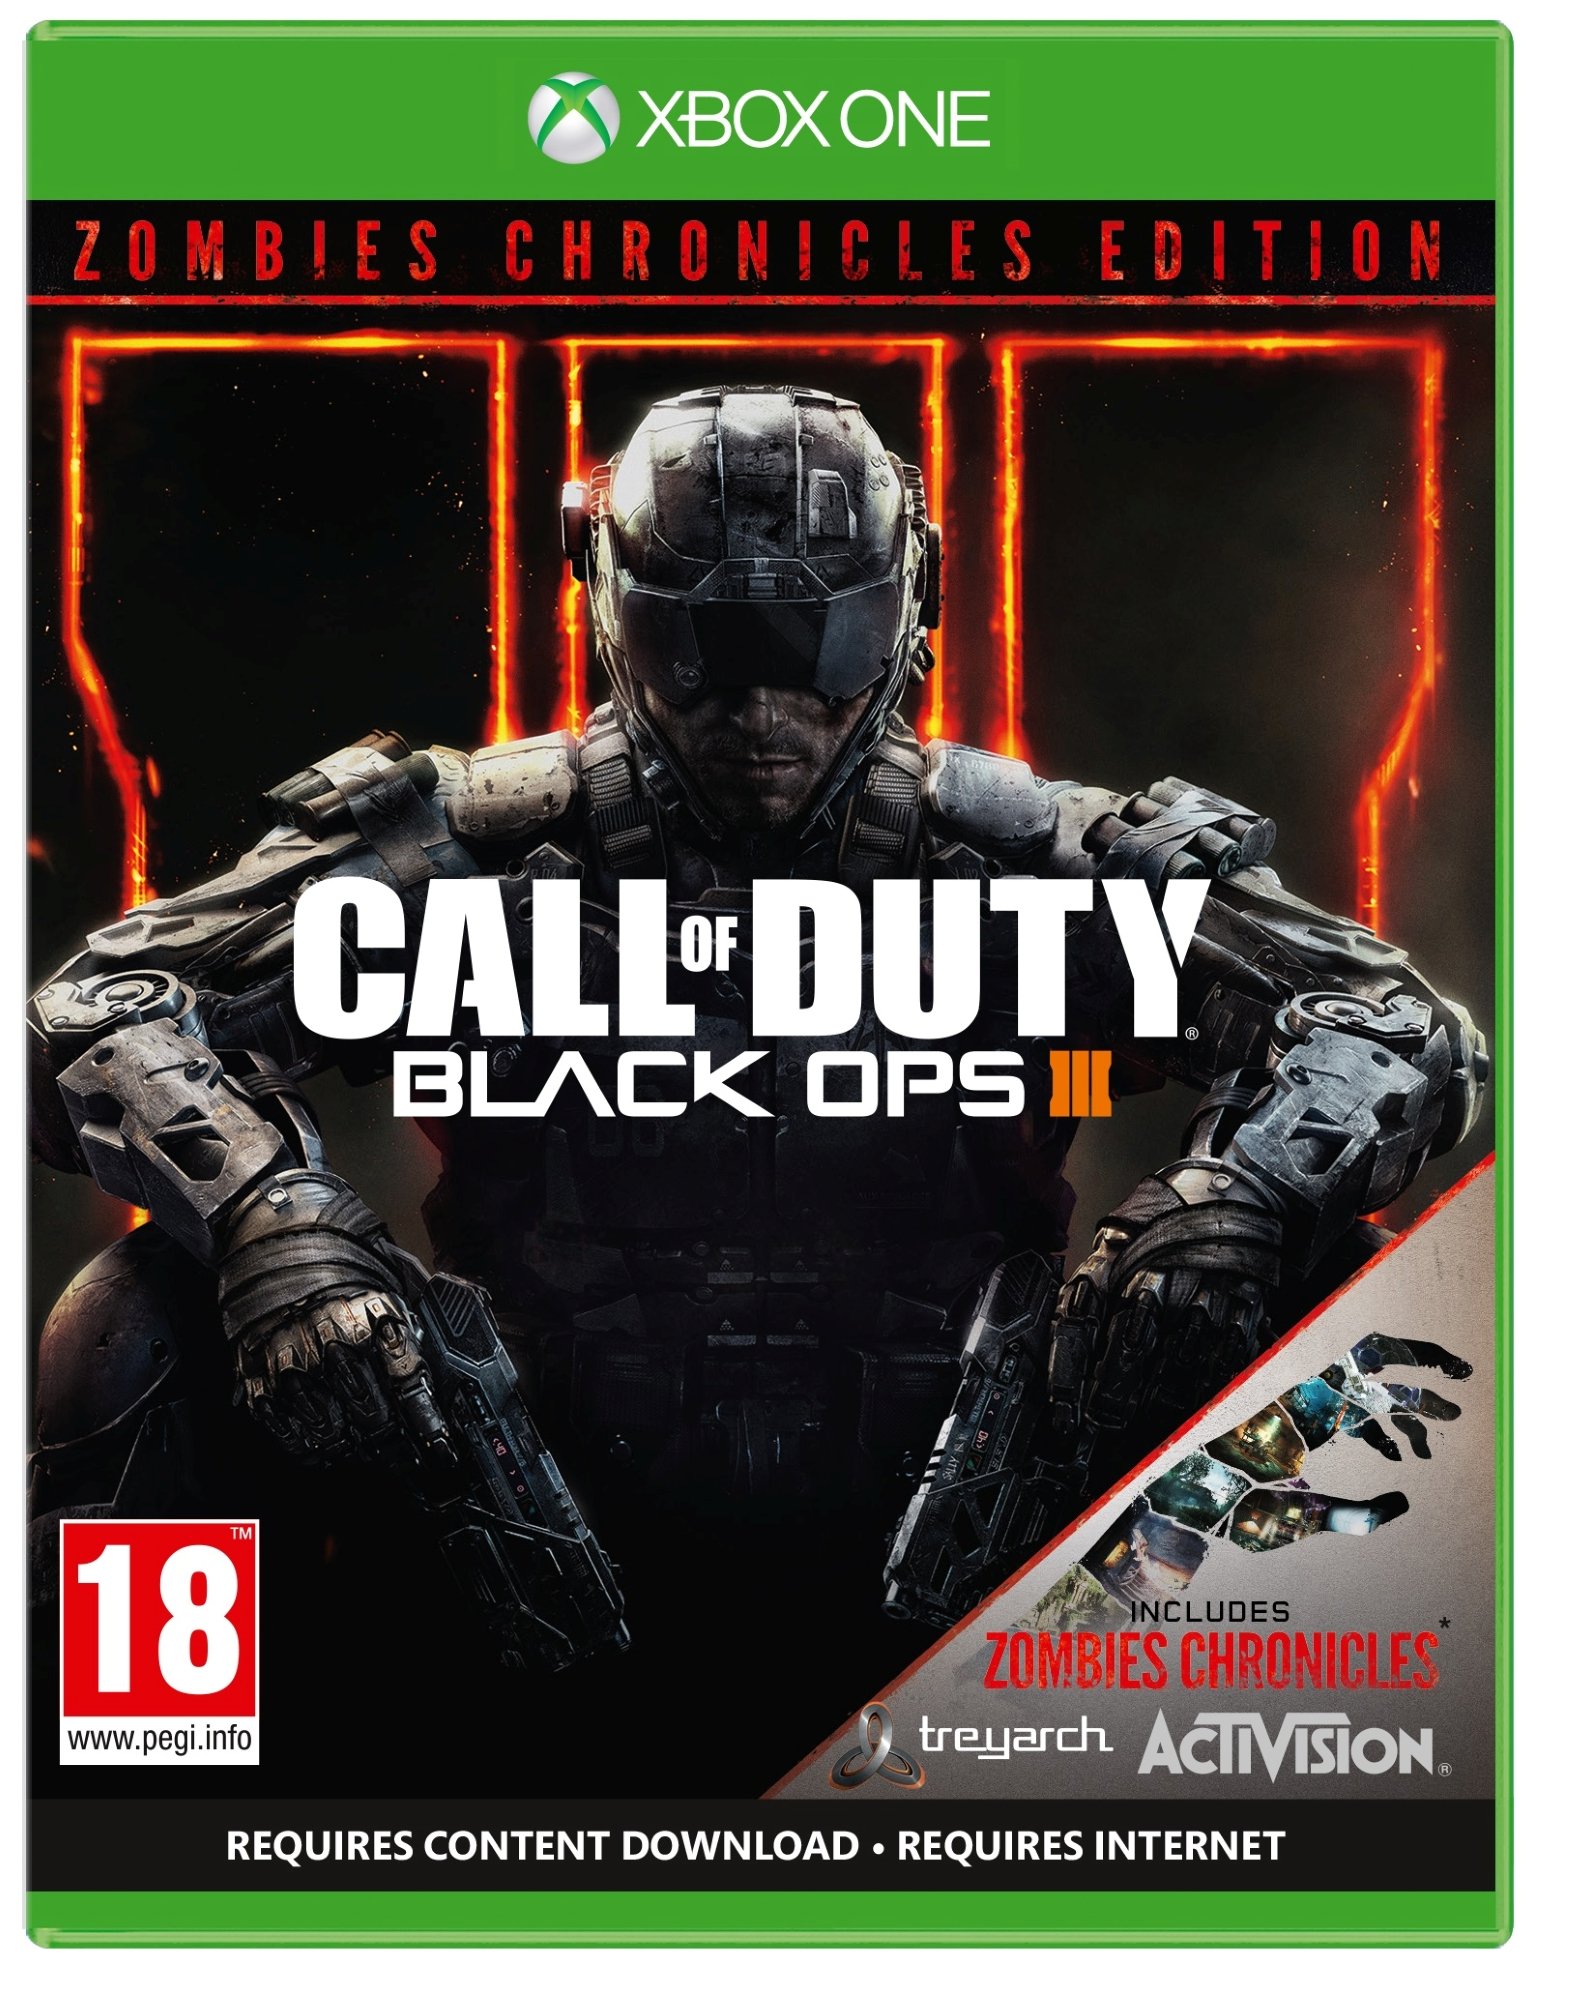 black ops 3 zombie chronicles edition sale